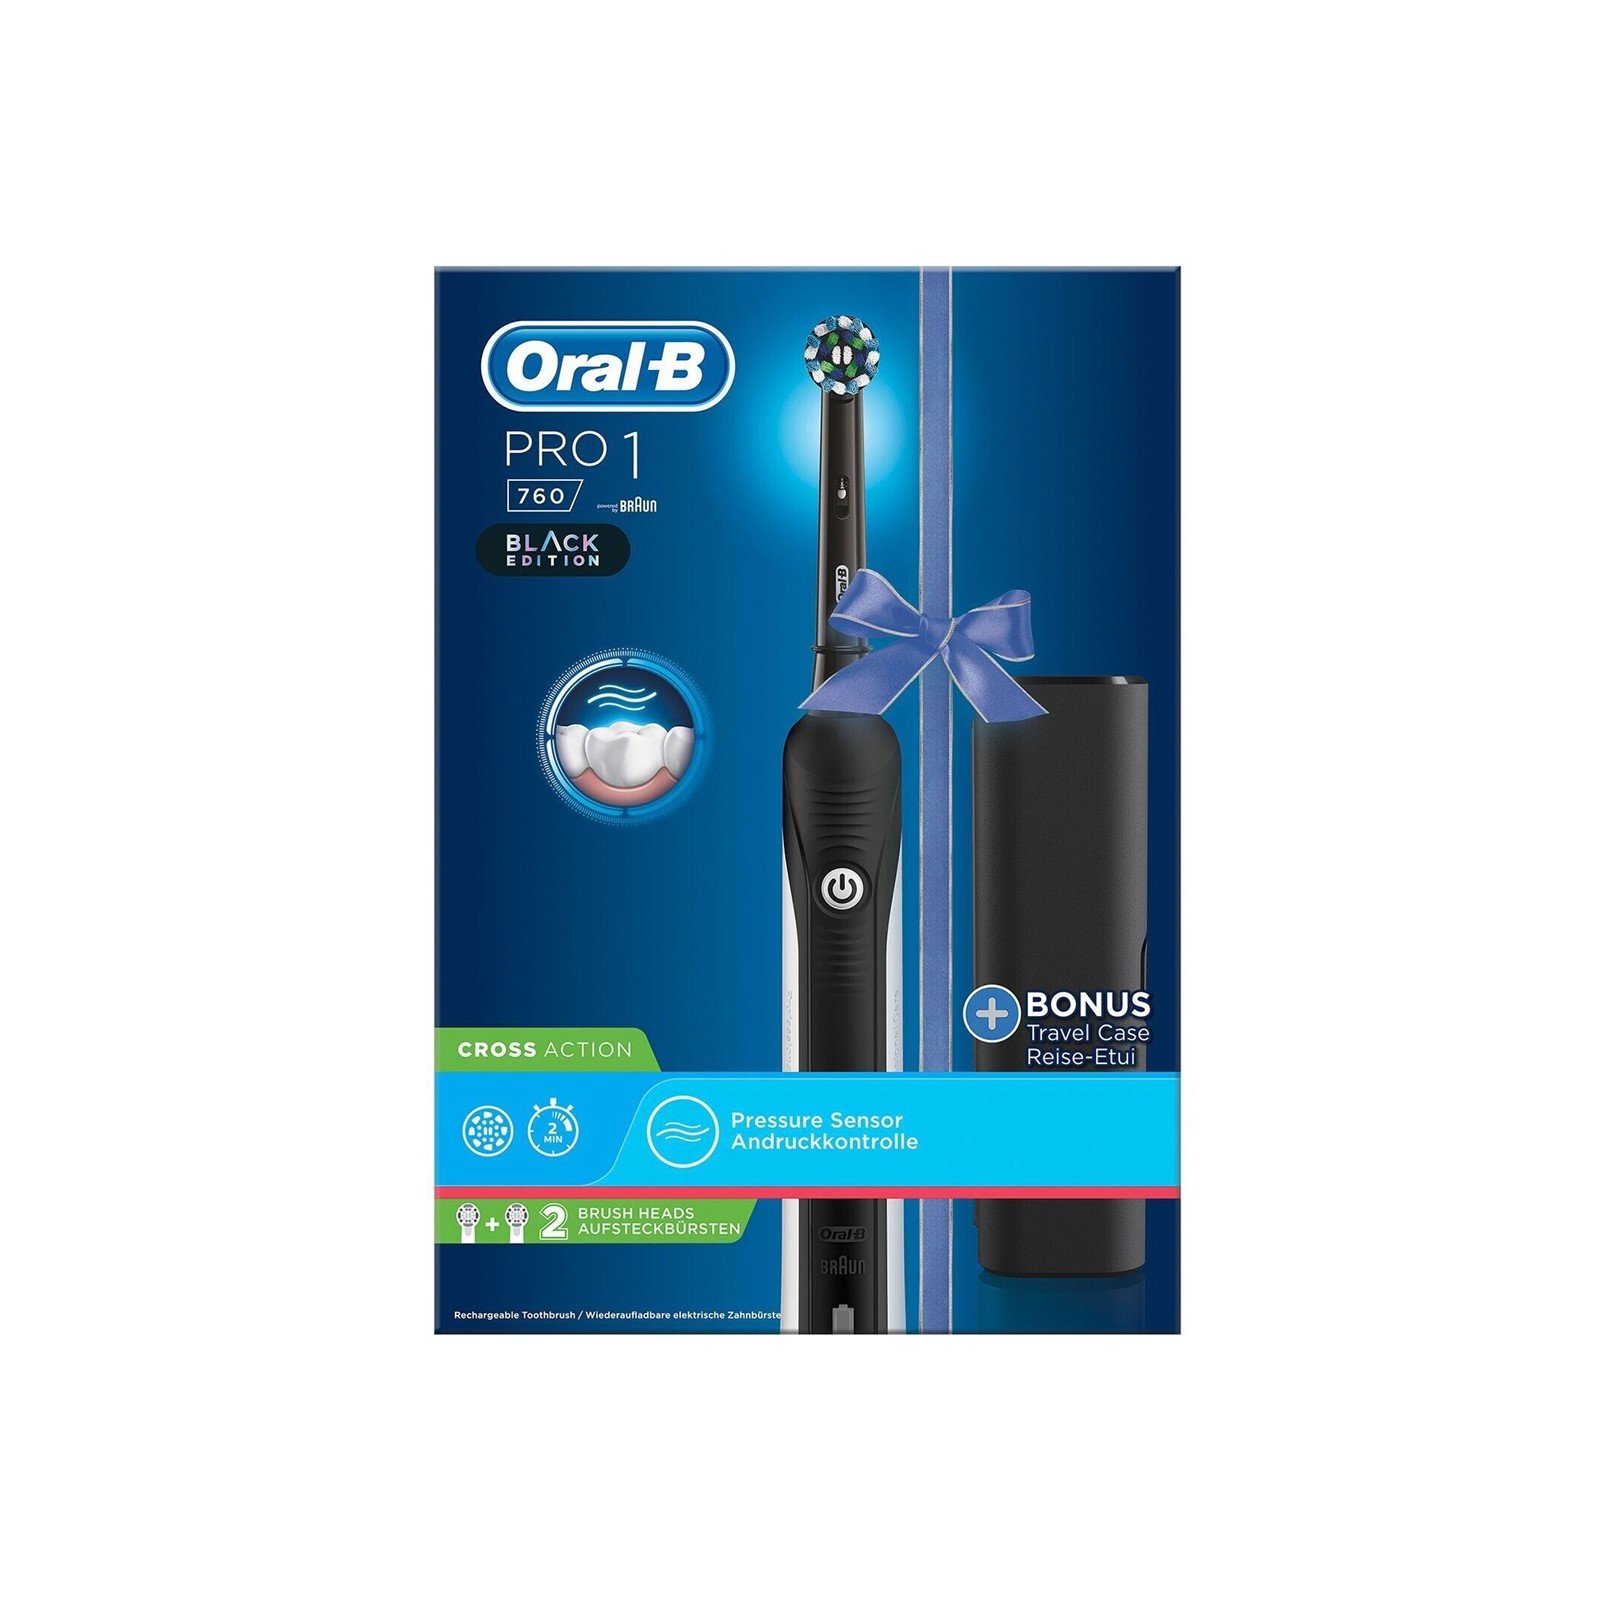 Luik gewoontjes Stereotype Buy Oral-B Pro 1 760 Black Edition Cross Action Electric Toothbrush · USA